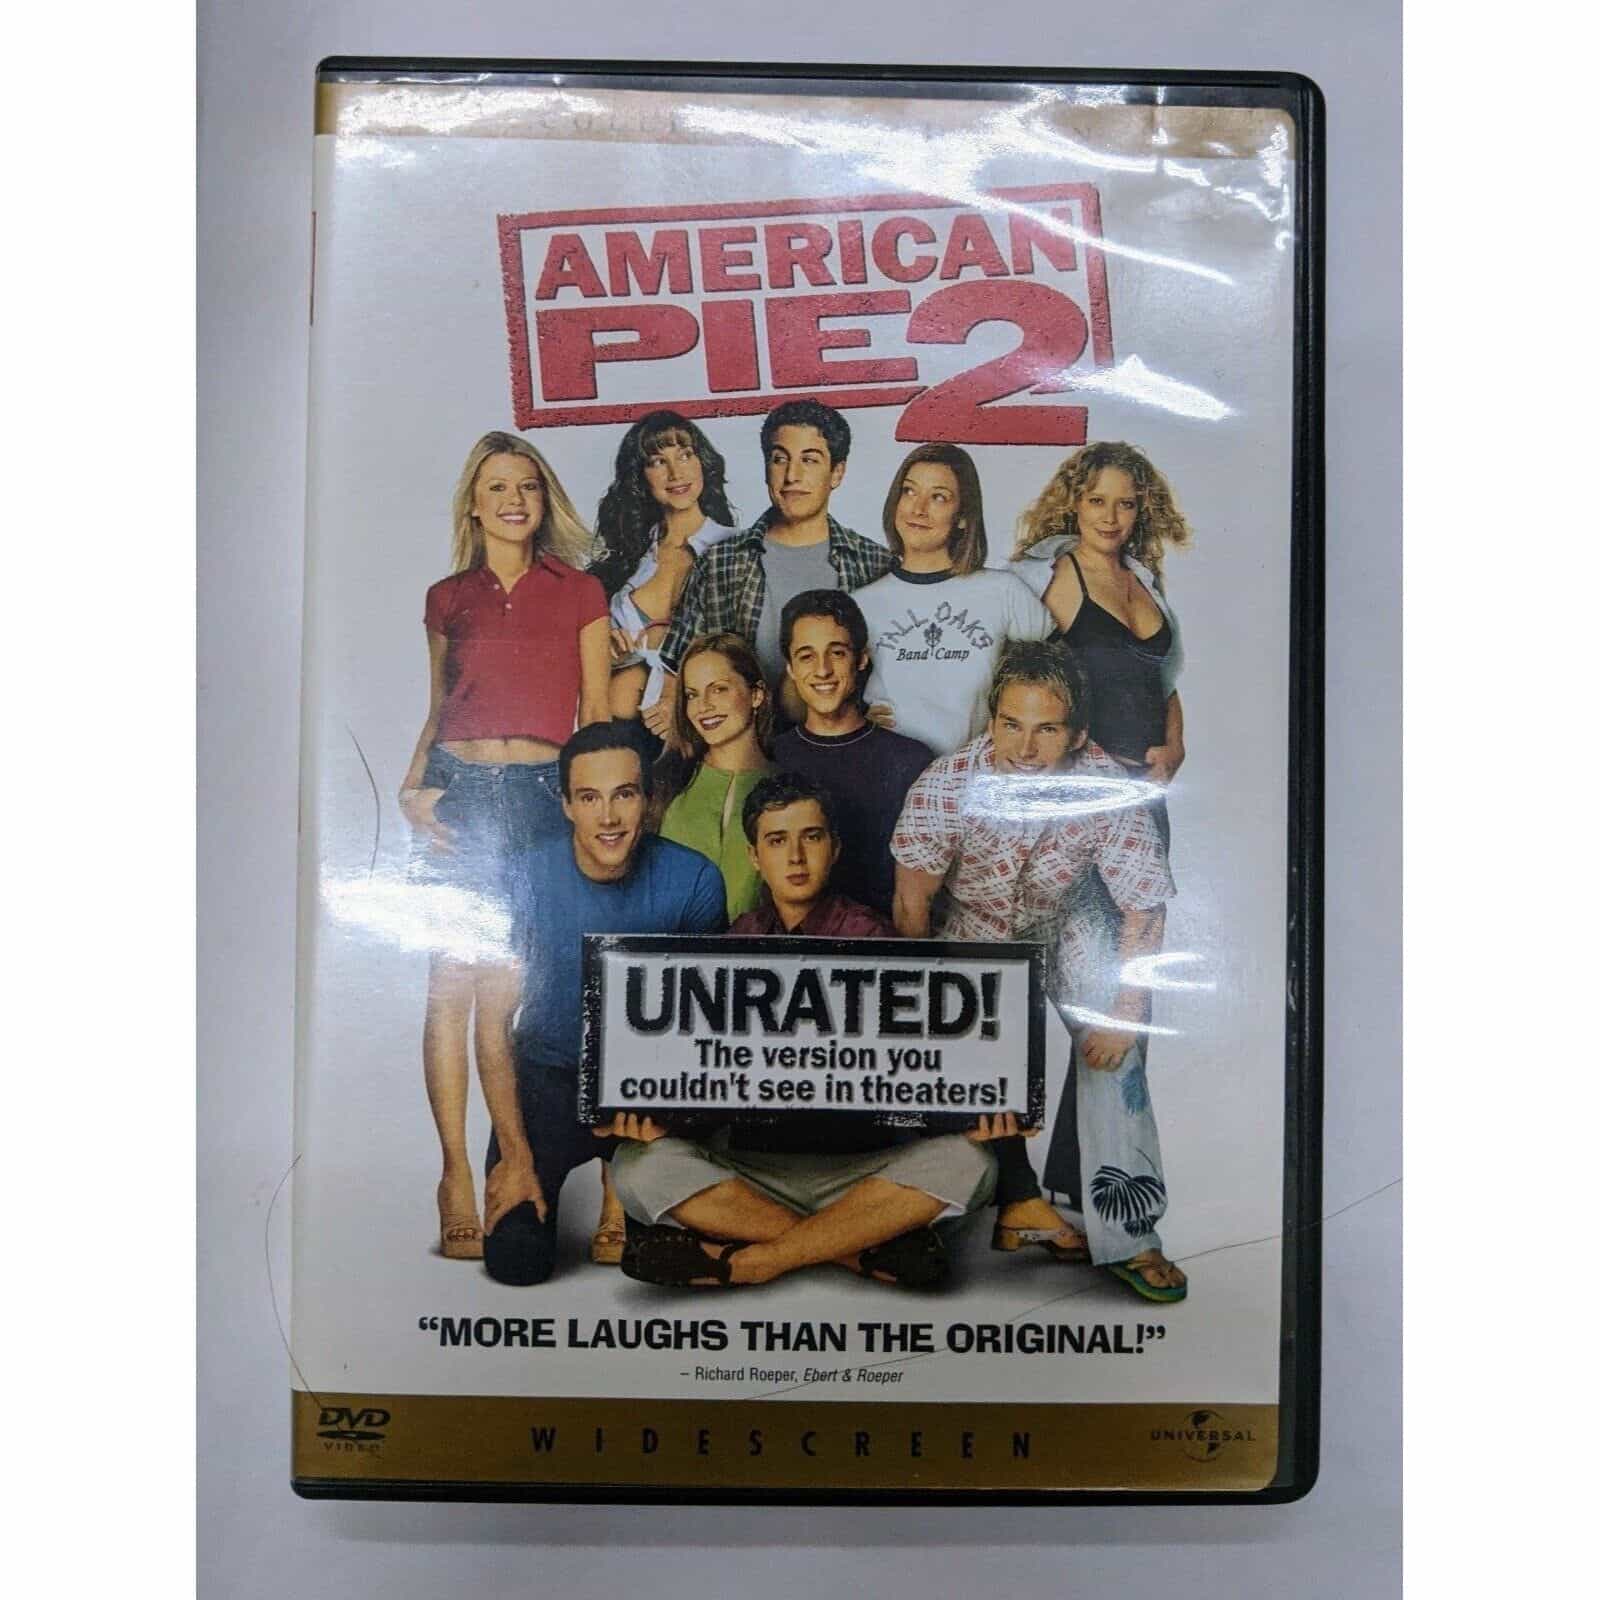 American Pie 2 DVD movie – Unrated Version